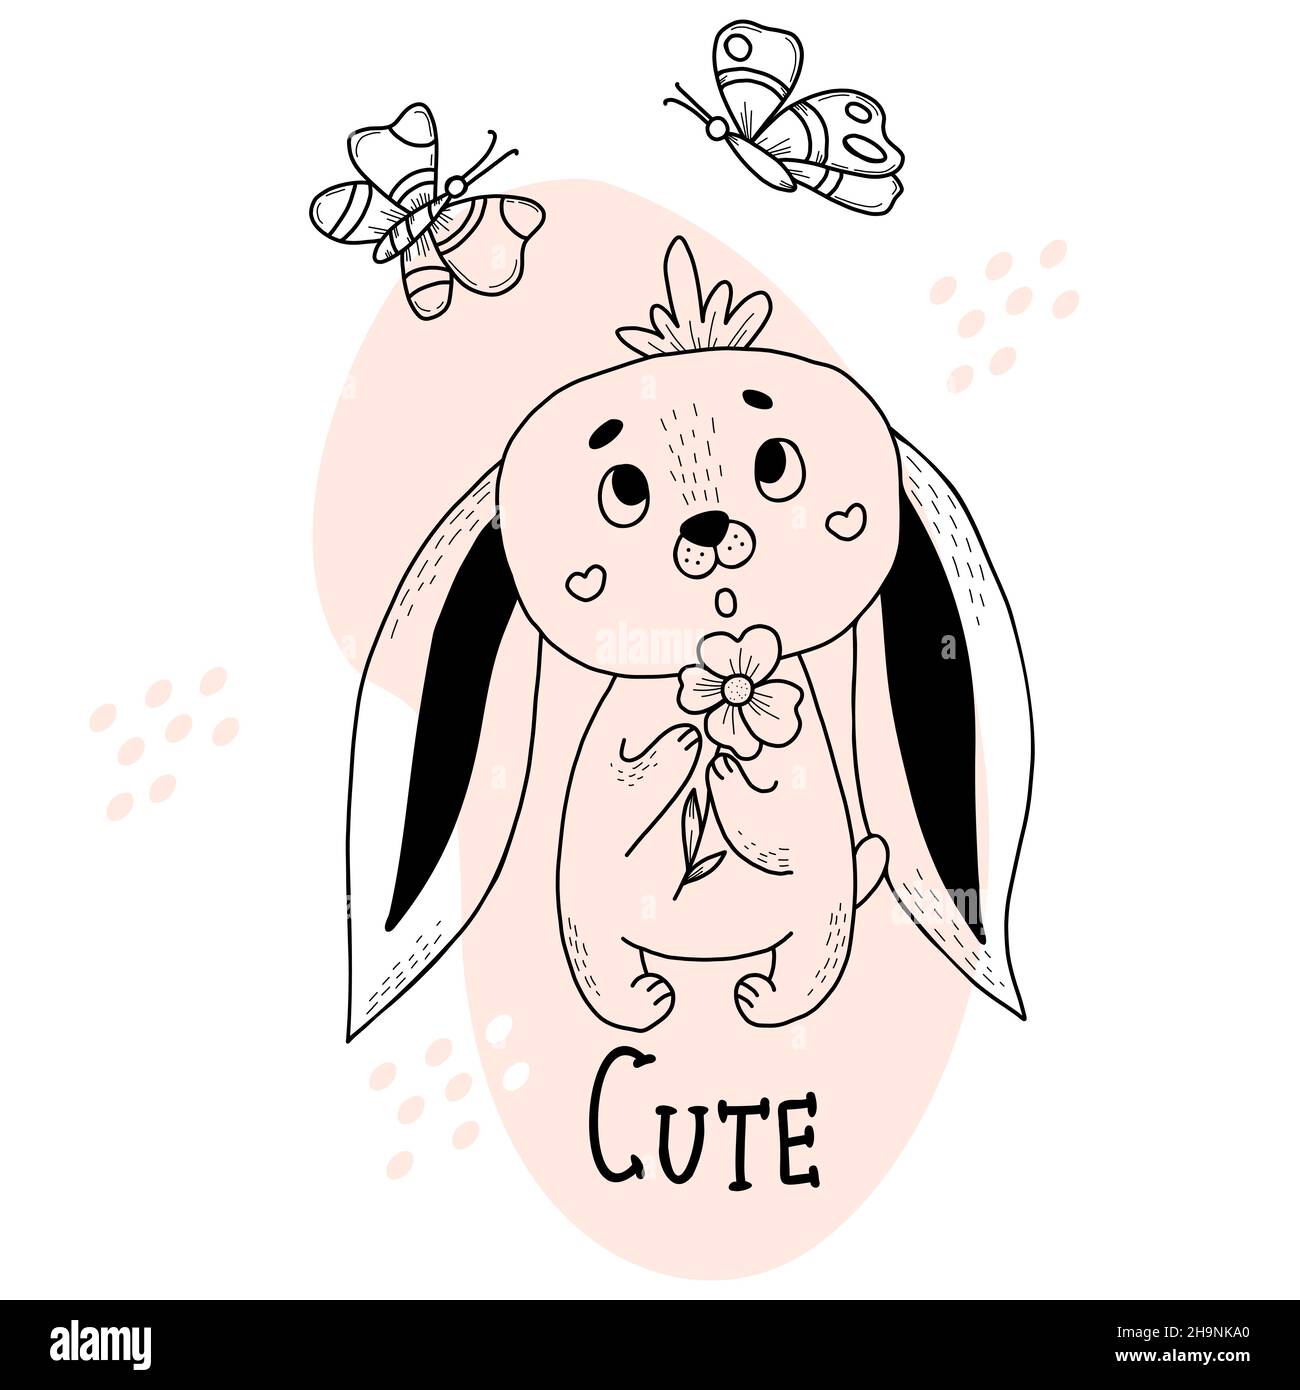 Cute bunny with haircut with flower in its paws and flying butterflies. Vector illustration. Postcard in style of hand drawn linear doodles. Funny ani Stock Vector